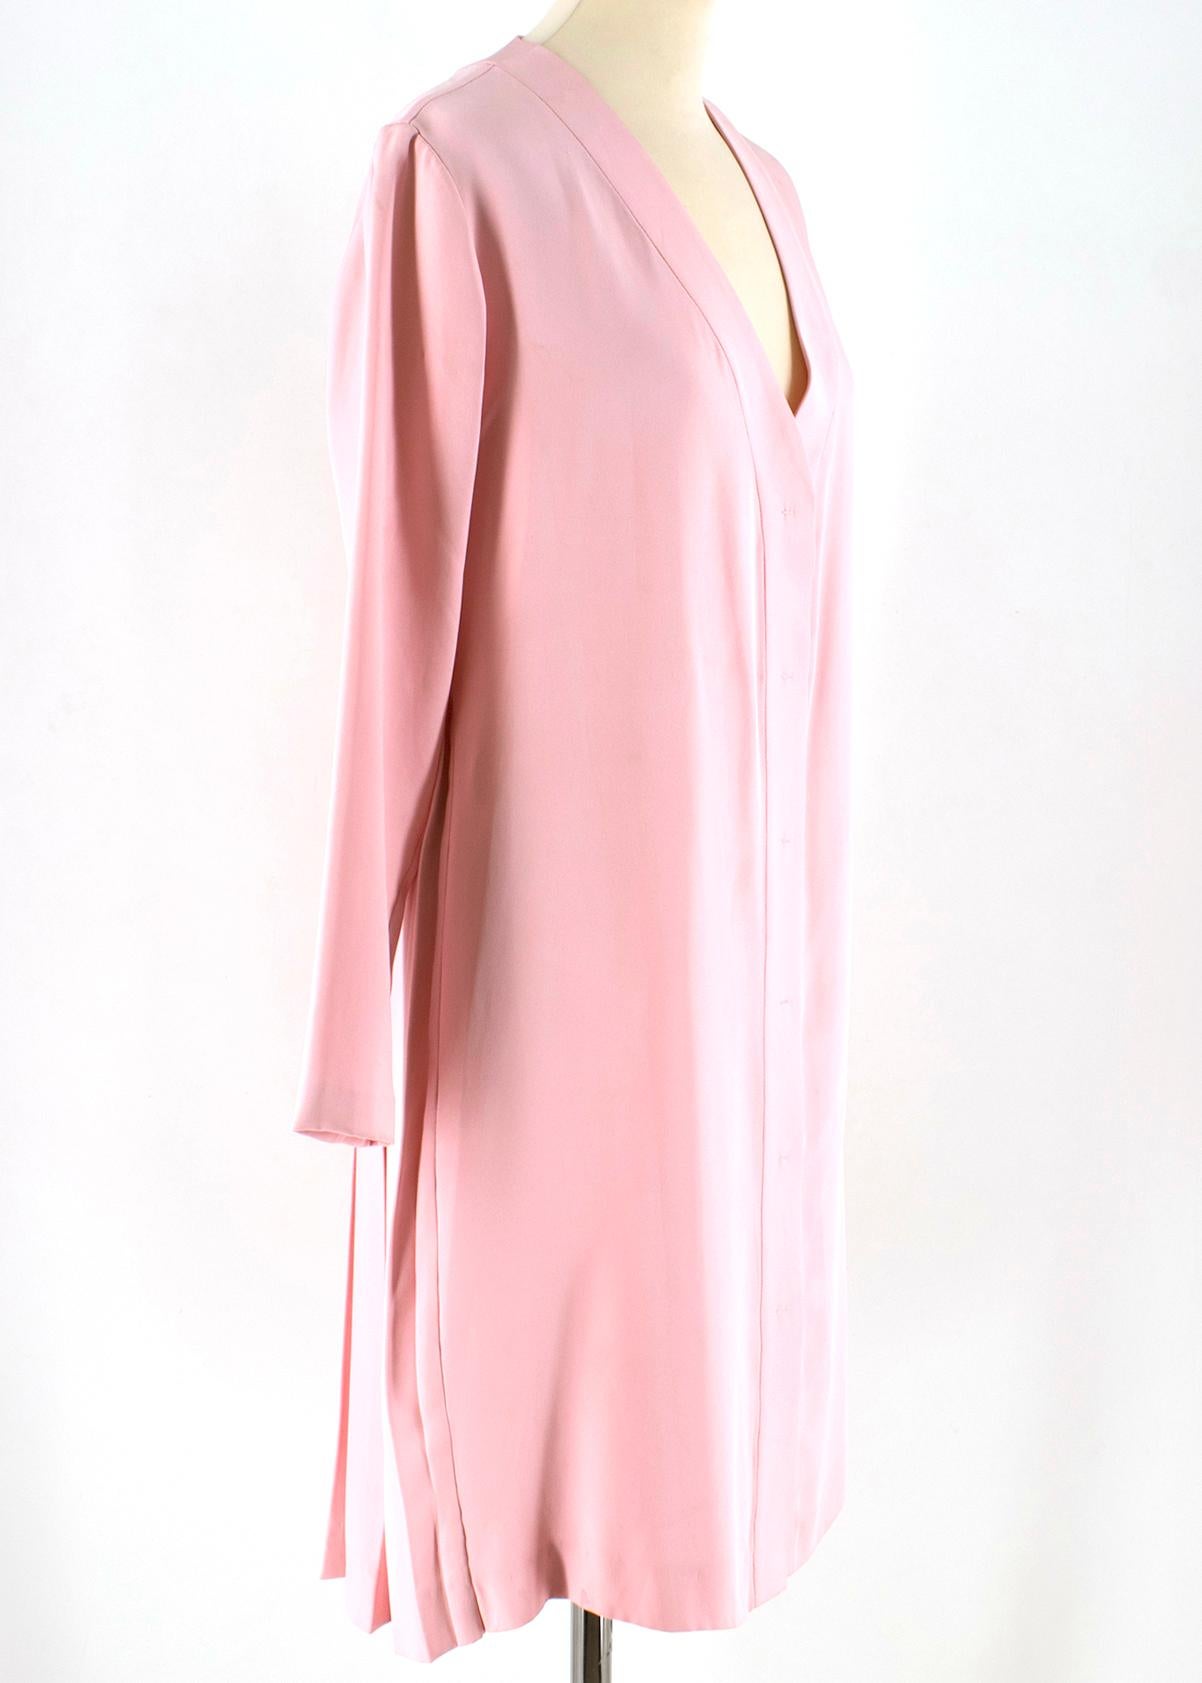 Emilia Wickstead Pink Silk Shirt Dress

- pink silk shirt dress
- ruffle bottom to the back 
- pull on 
- unlined
- relaxed fit
- v- neckline
- long sleeve

The seller usually wears XS size.

Please note, these items are pre-owned and may show some